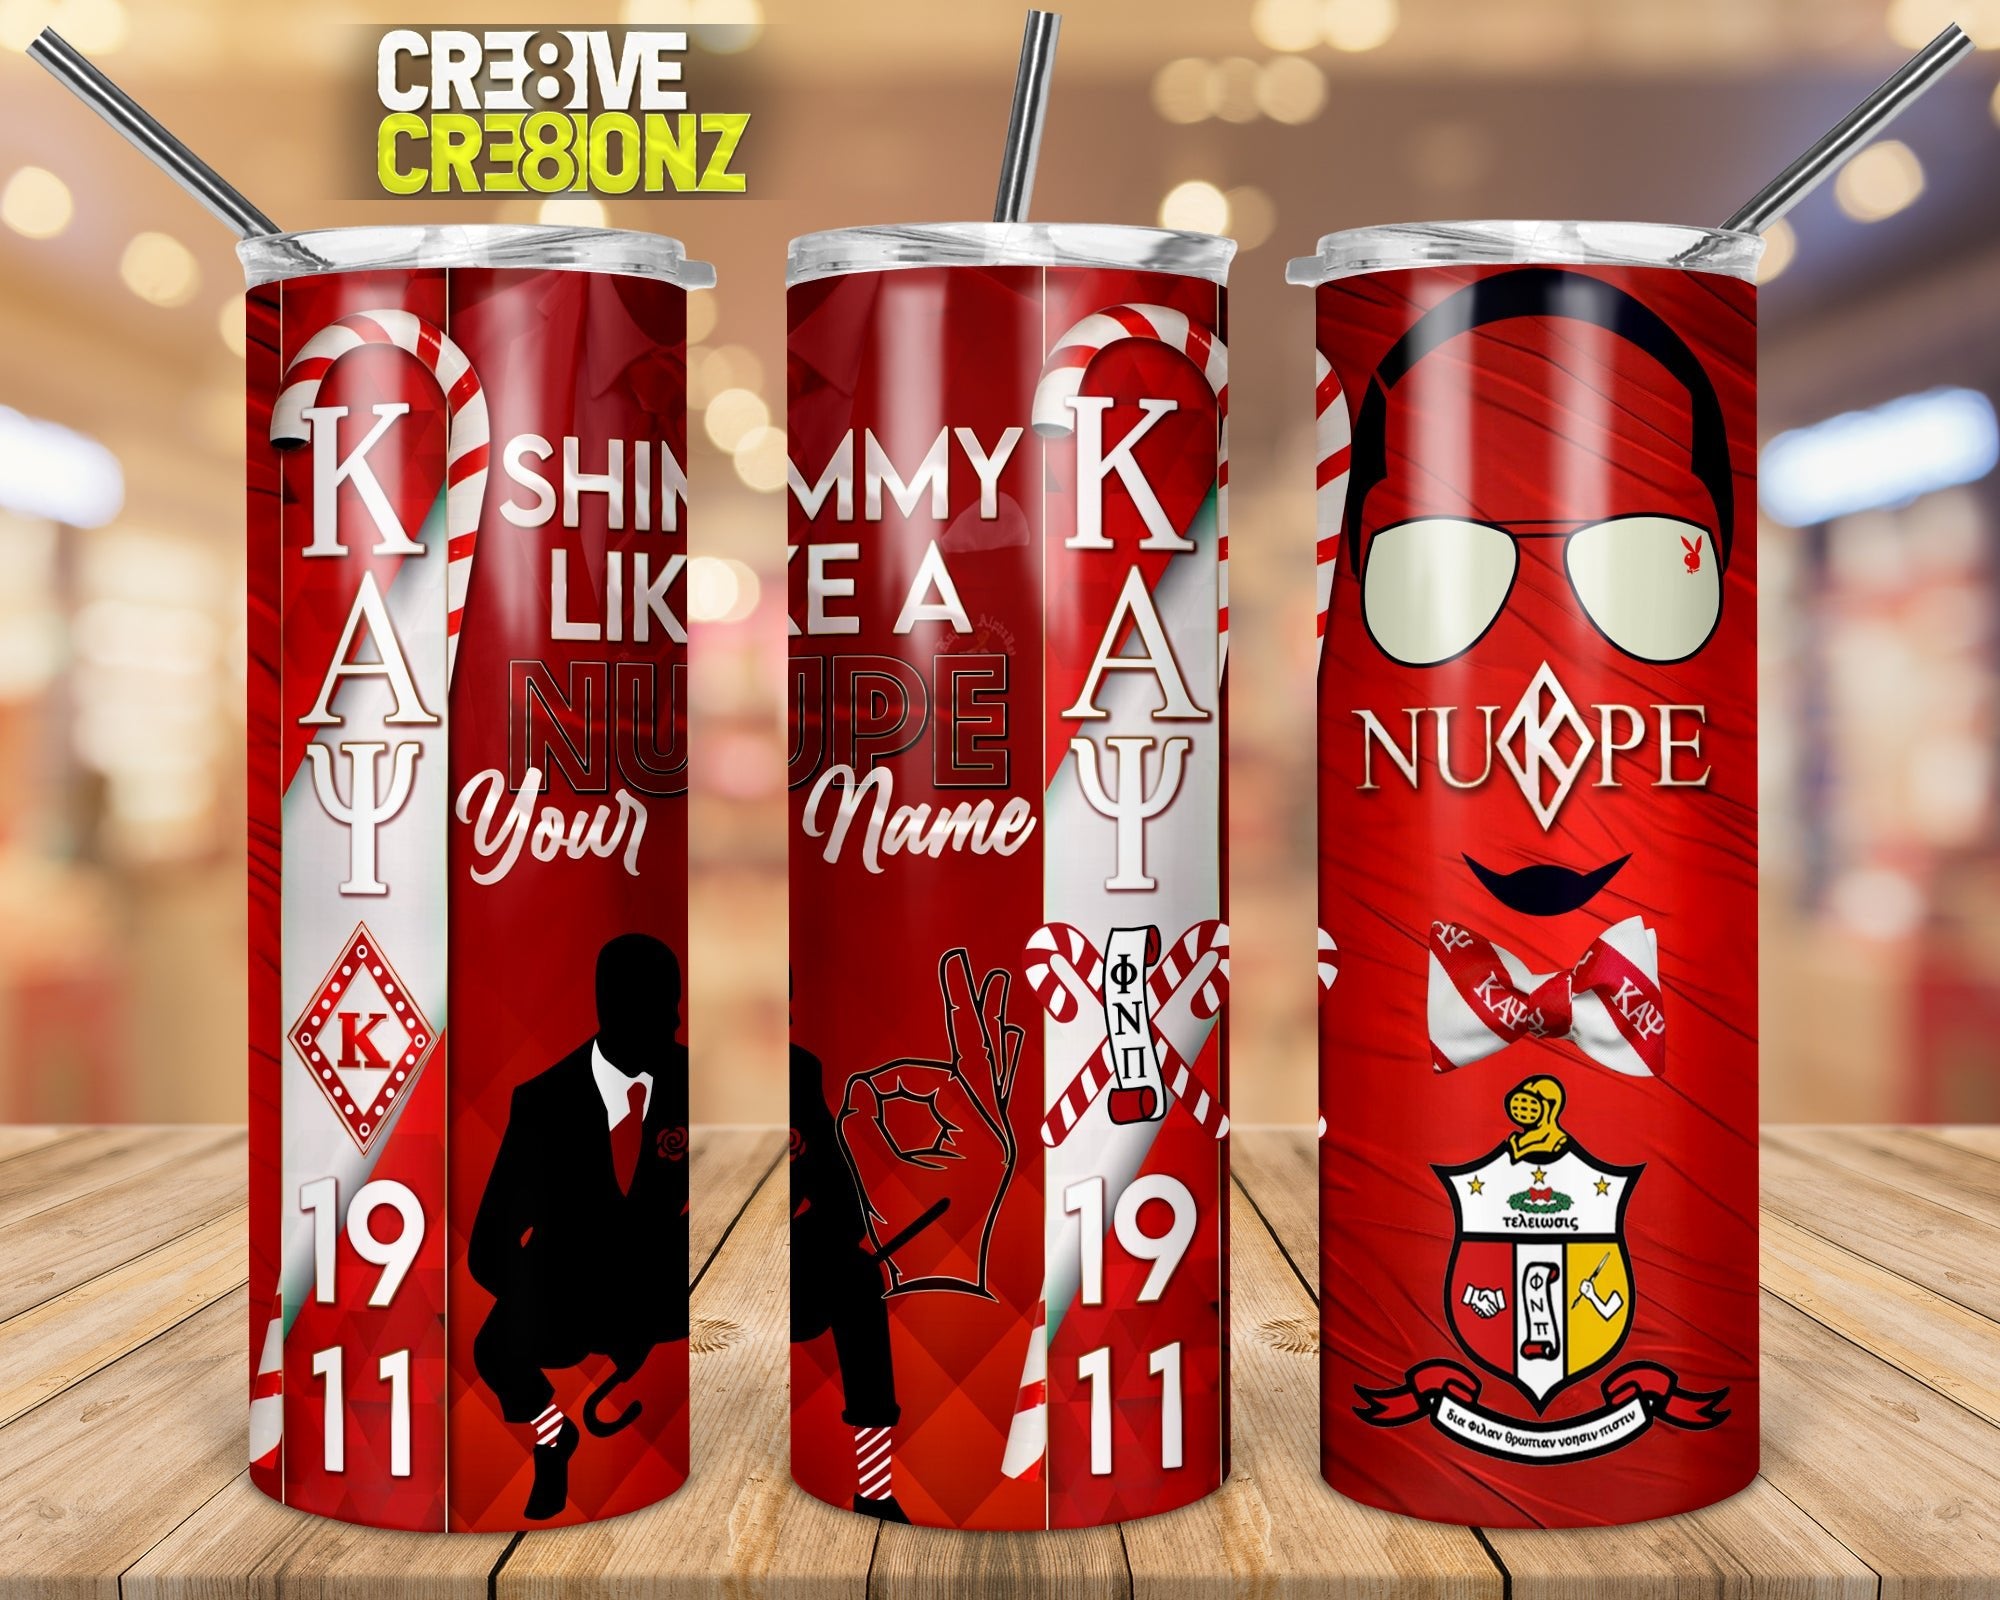 Greek Tumblers – Cre8ive Cre8ionz